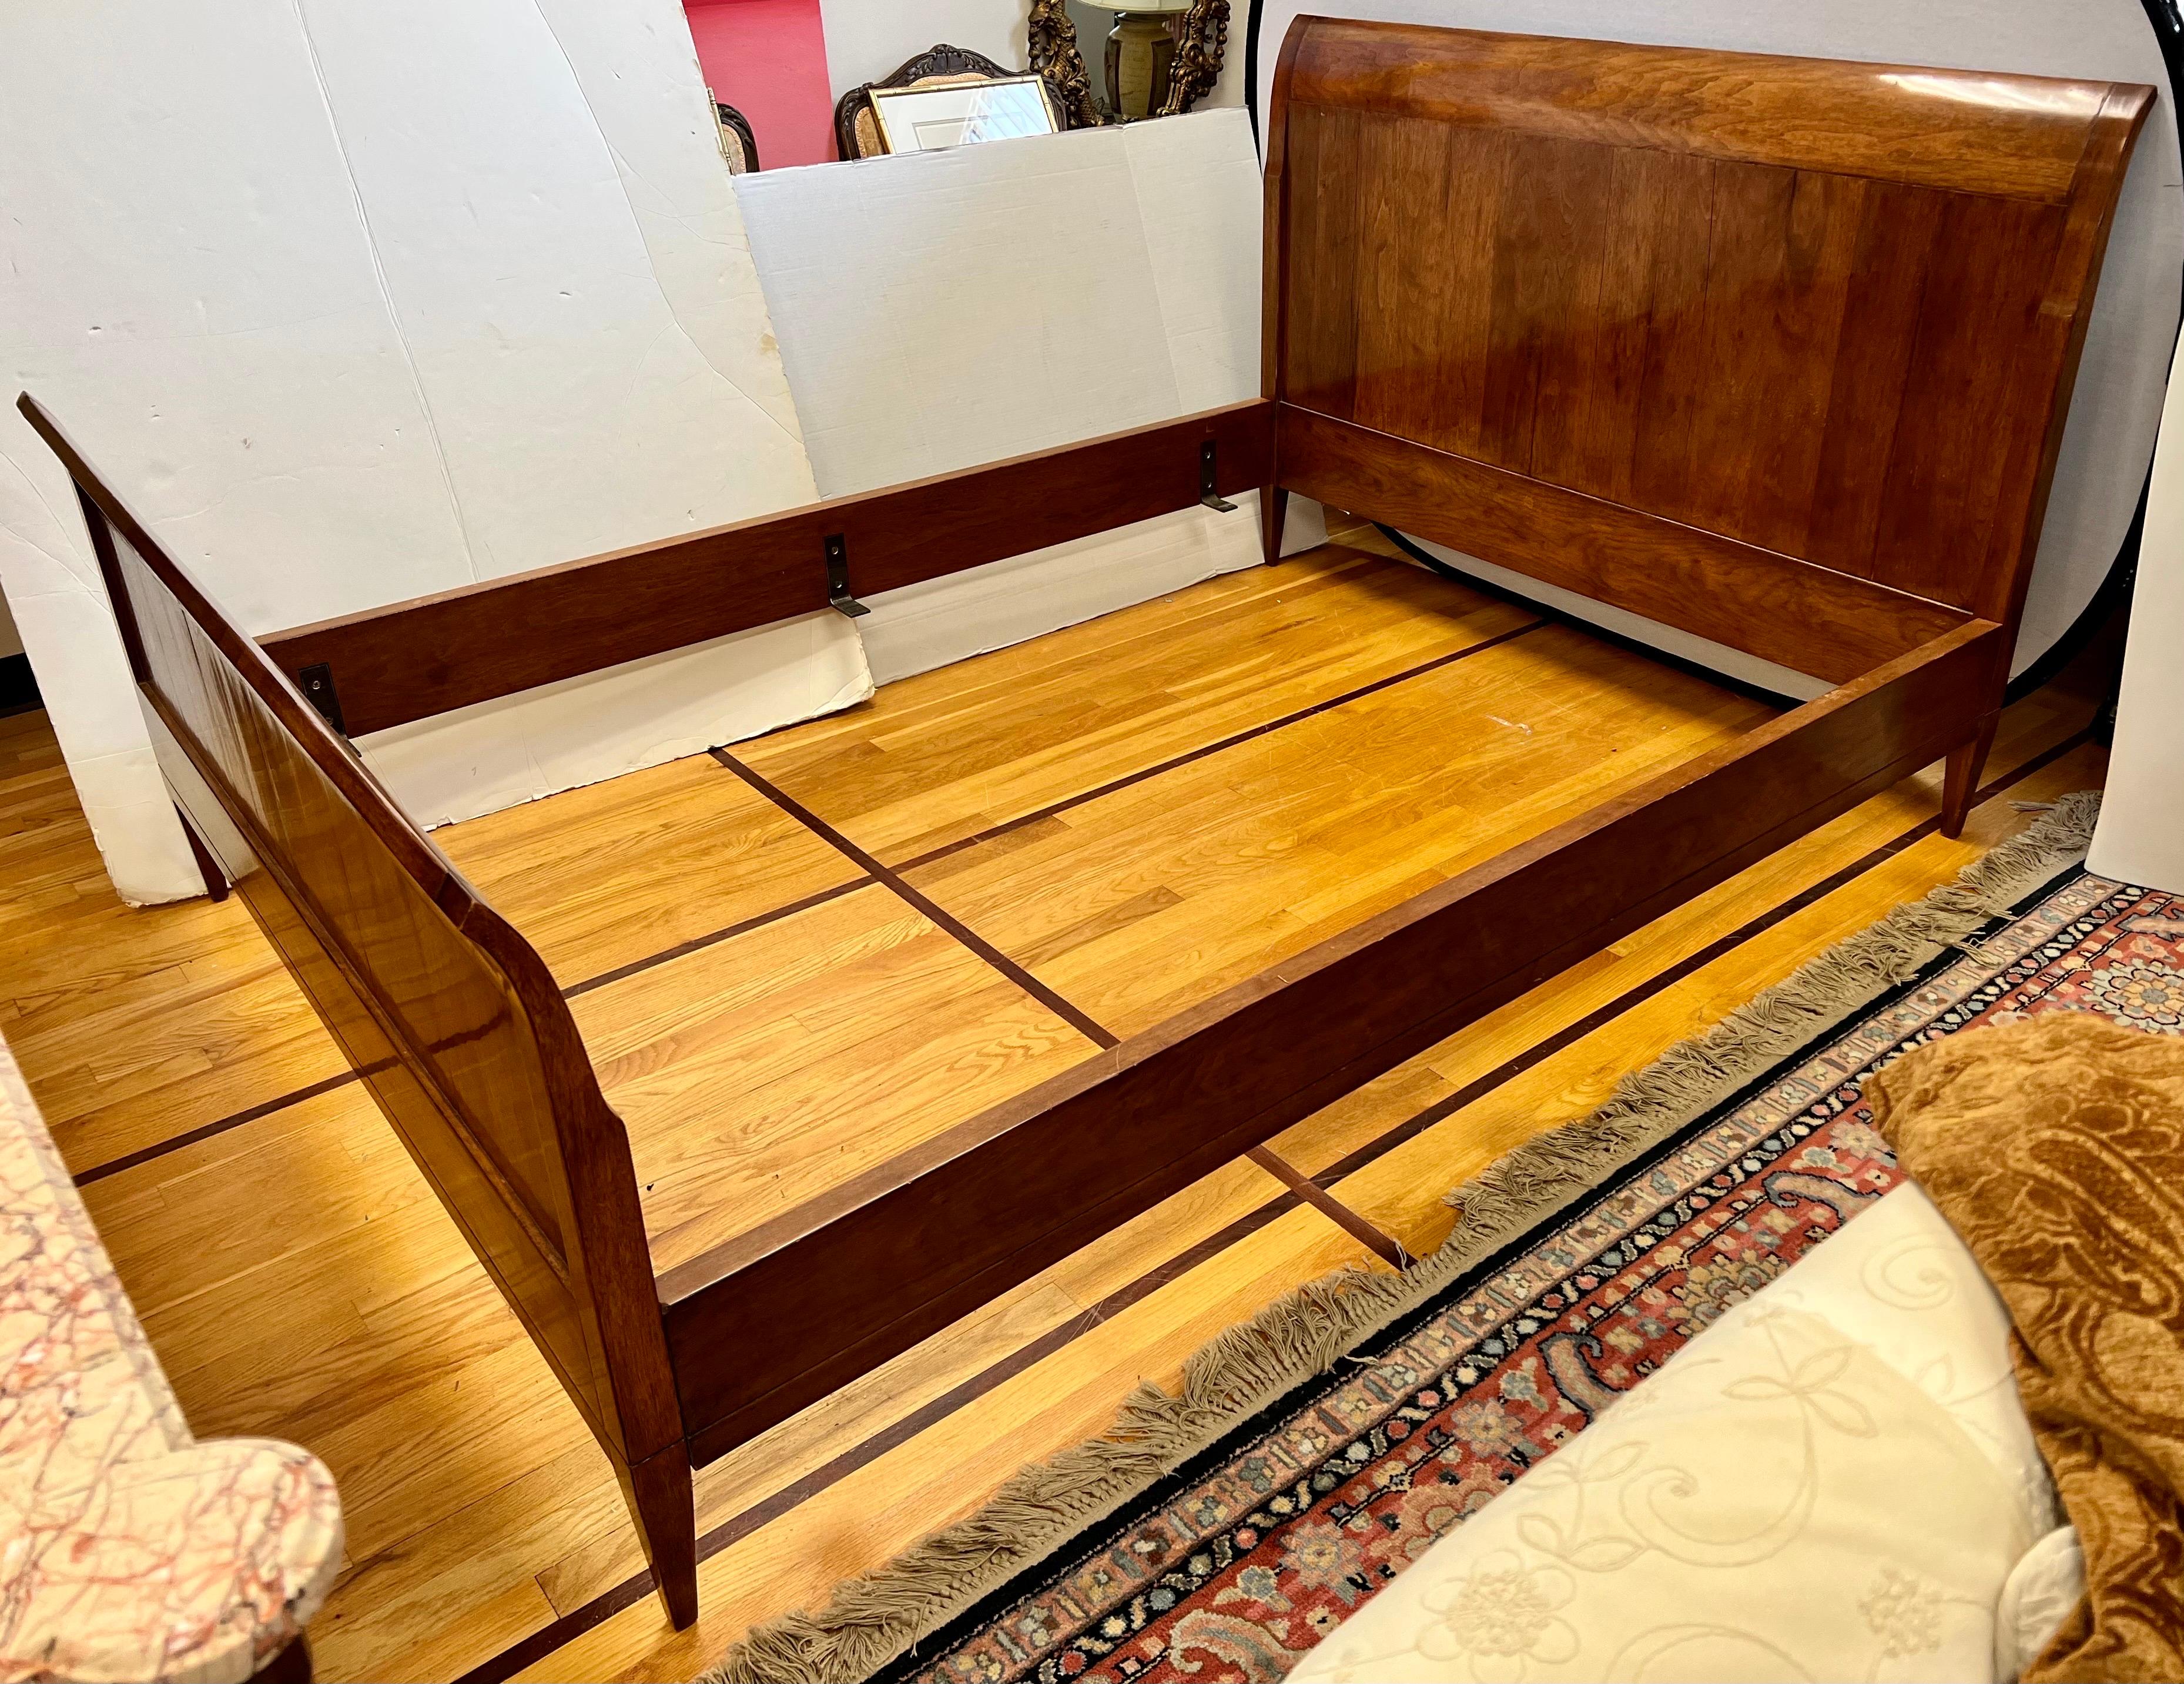 Antique solid rock maple sleighbed with headboard, footboard and side rails. Has attached metal supports. The finish has aged to a beautiful golden hue.

Measures: 64” wide by 43” tall at the headboard x 84” long and the footboard is 30” tall.